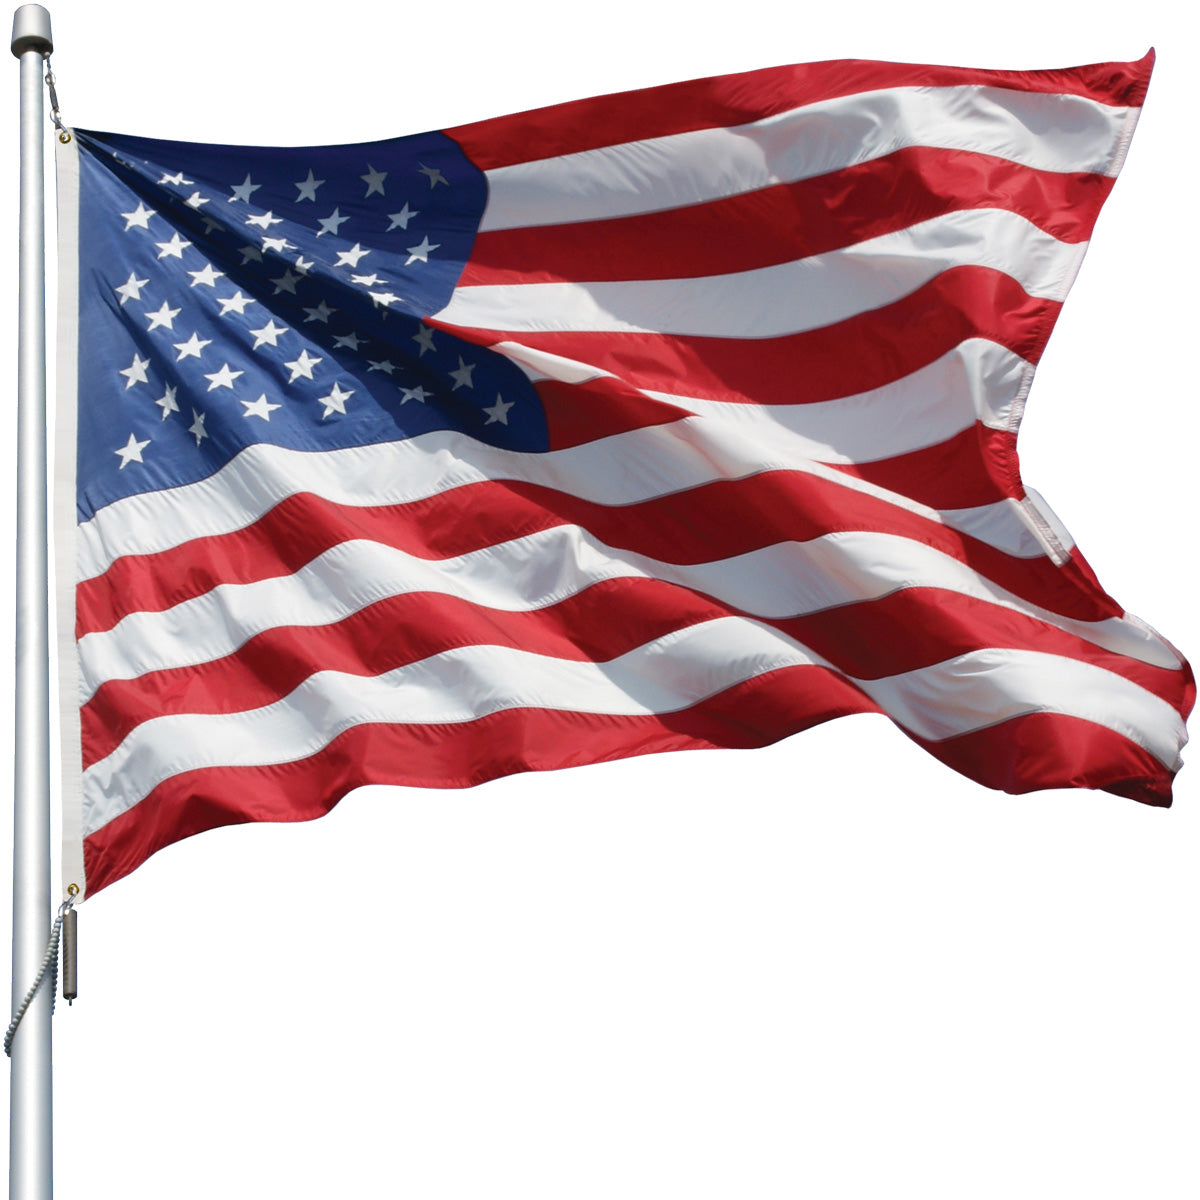 Color Lasting U.S. Flags for Sunny Areas